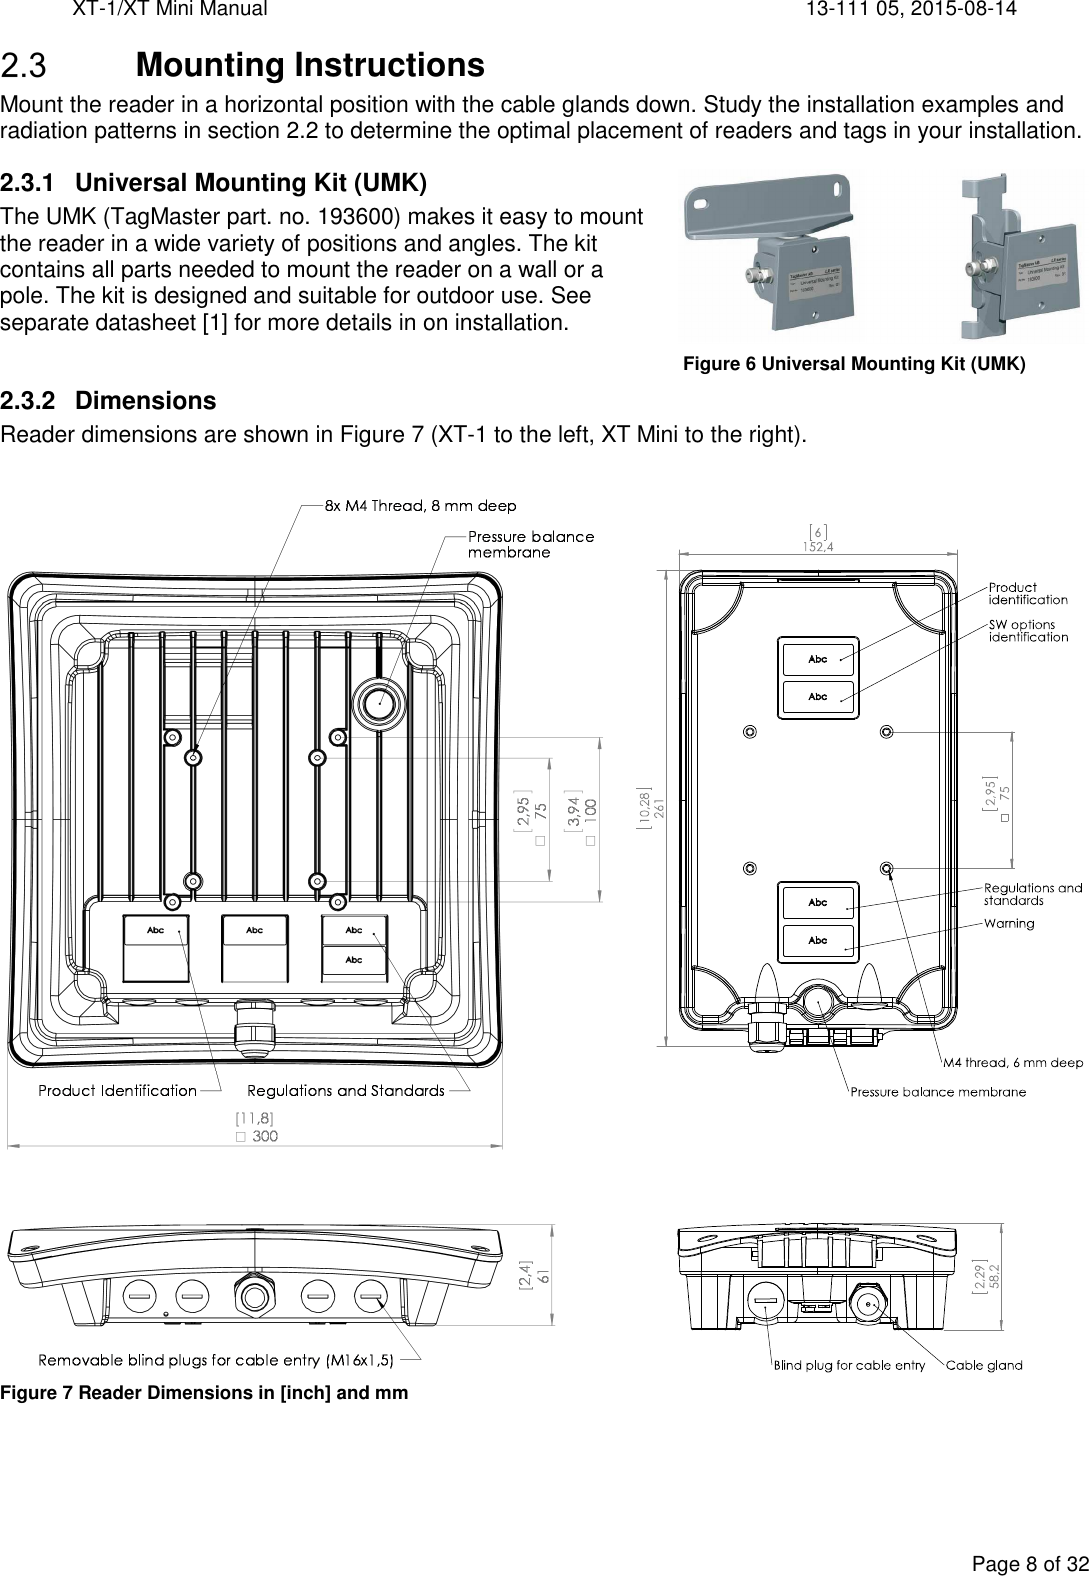 XT-1/XT Mini Manual     13-111 05, 2015-08-14  Page 8 of 32   Mounting Instructions Mount the reader in a horizontal position with the cable glands down. Study the installation examples and radiation patterns in section 2.2 to determine the optimal placement of readers and tags in your installation. 2.3.1  Universal Mounting Kit (UMK) The UMK (TagMaster part. no. 193600) makes it easy to mount the reader in a wide variety of positions and angles. The kit contains all parts needed to mount the reader on a wall or a pole. The kit is designed and suitable for outdoor use. See separate datasheet [1] for more details in on installation.  2.3.2  Dimensions Reader dimensions are shown in Figure 7 (XT-1 to the left, XT Mini to the right).   Figure 7 Reader Dimensions in [inch] and mm  Figure 6 Universal Mounting Kit (UMK) 